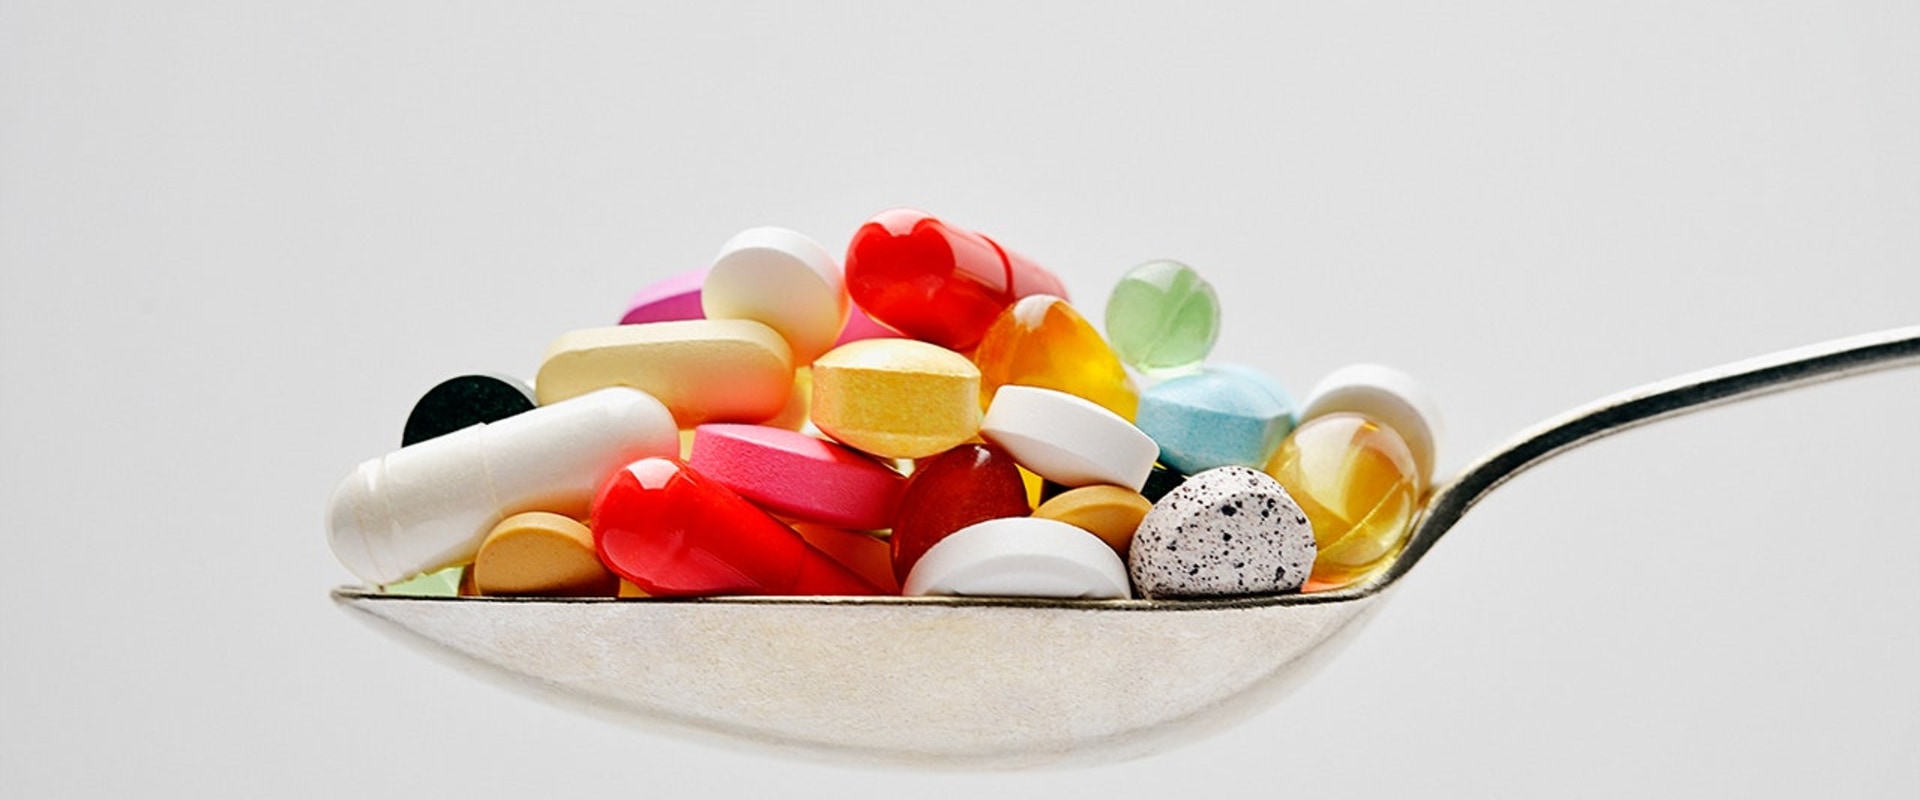 Is it okay to take vitamins inconsistently?